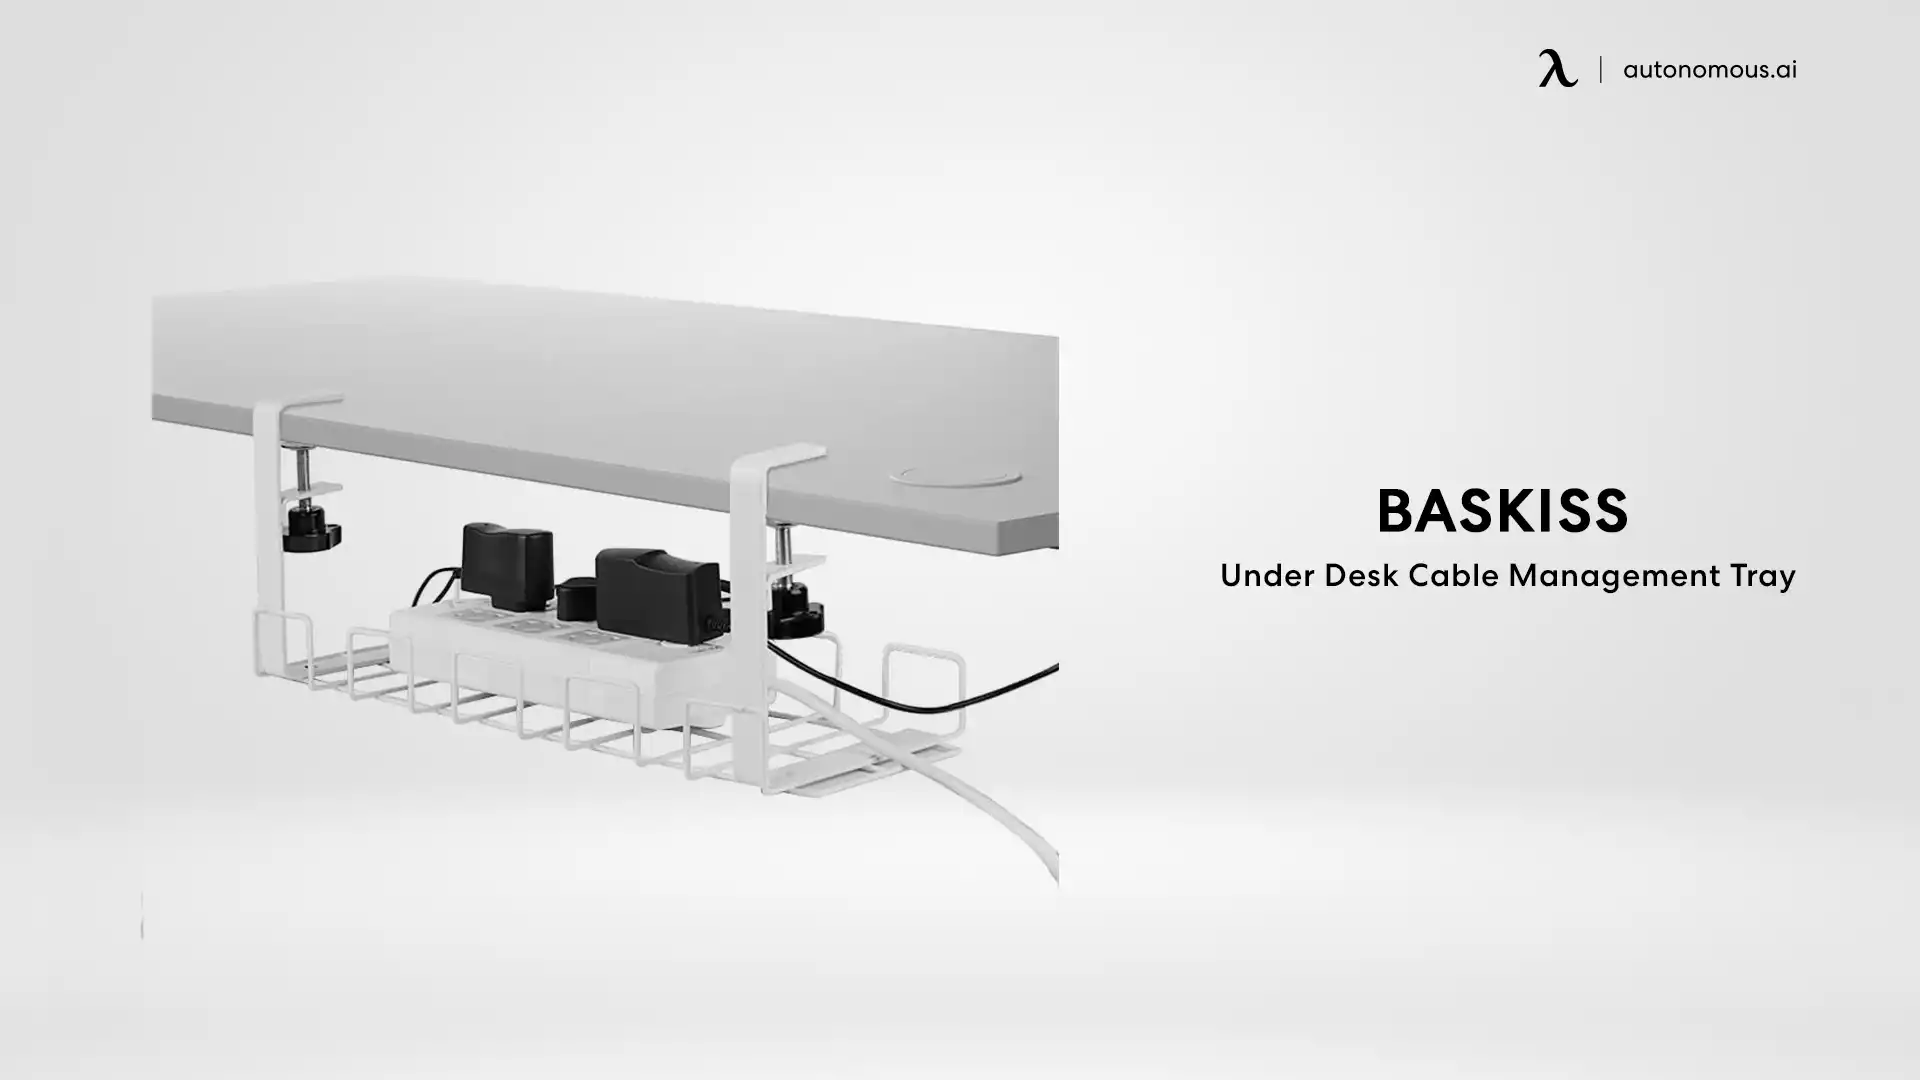 Under Desk Cable Management Tray by Baskiss